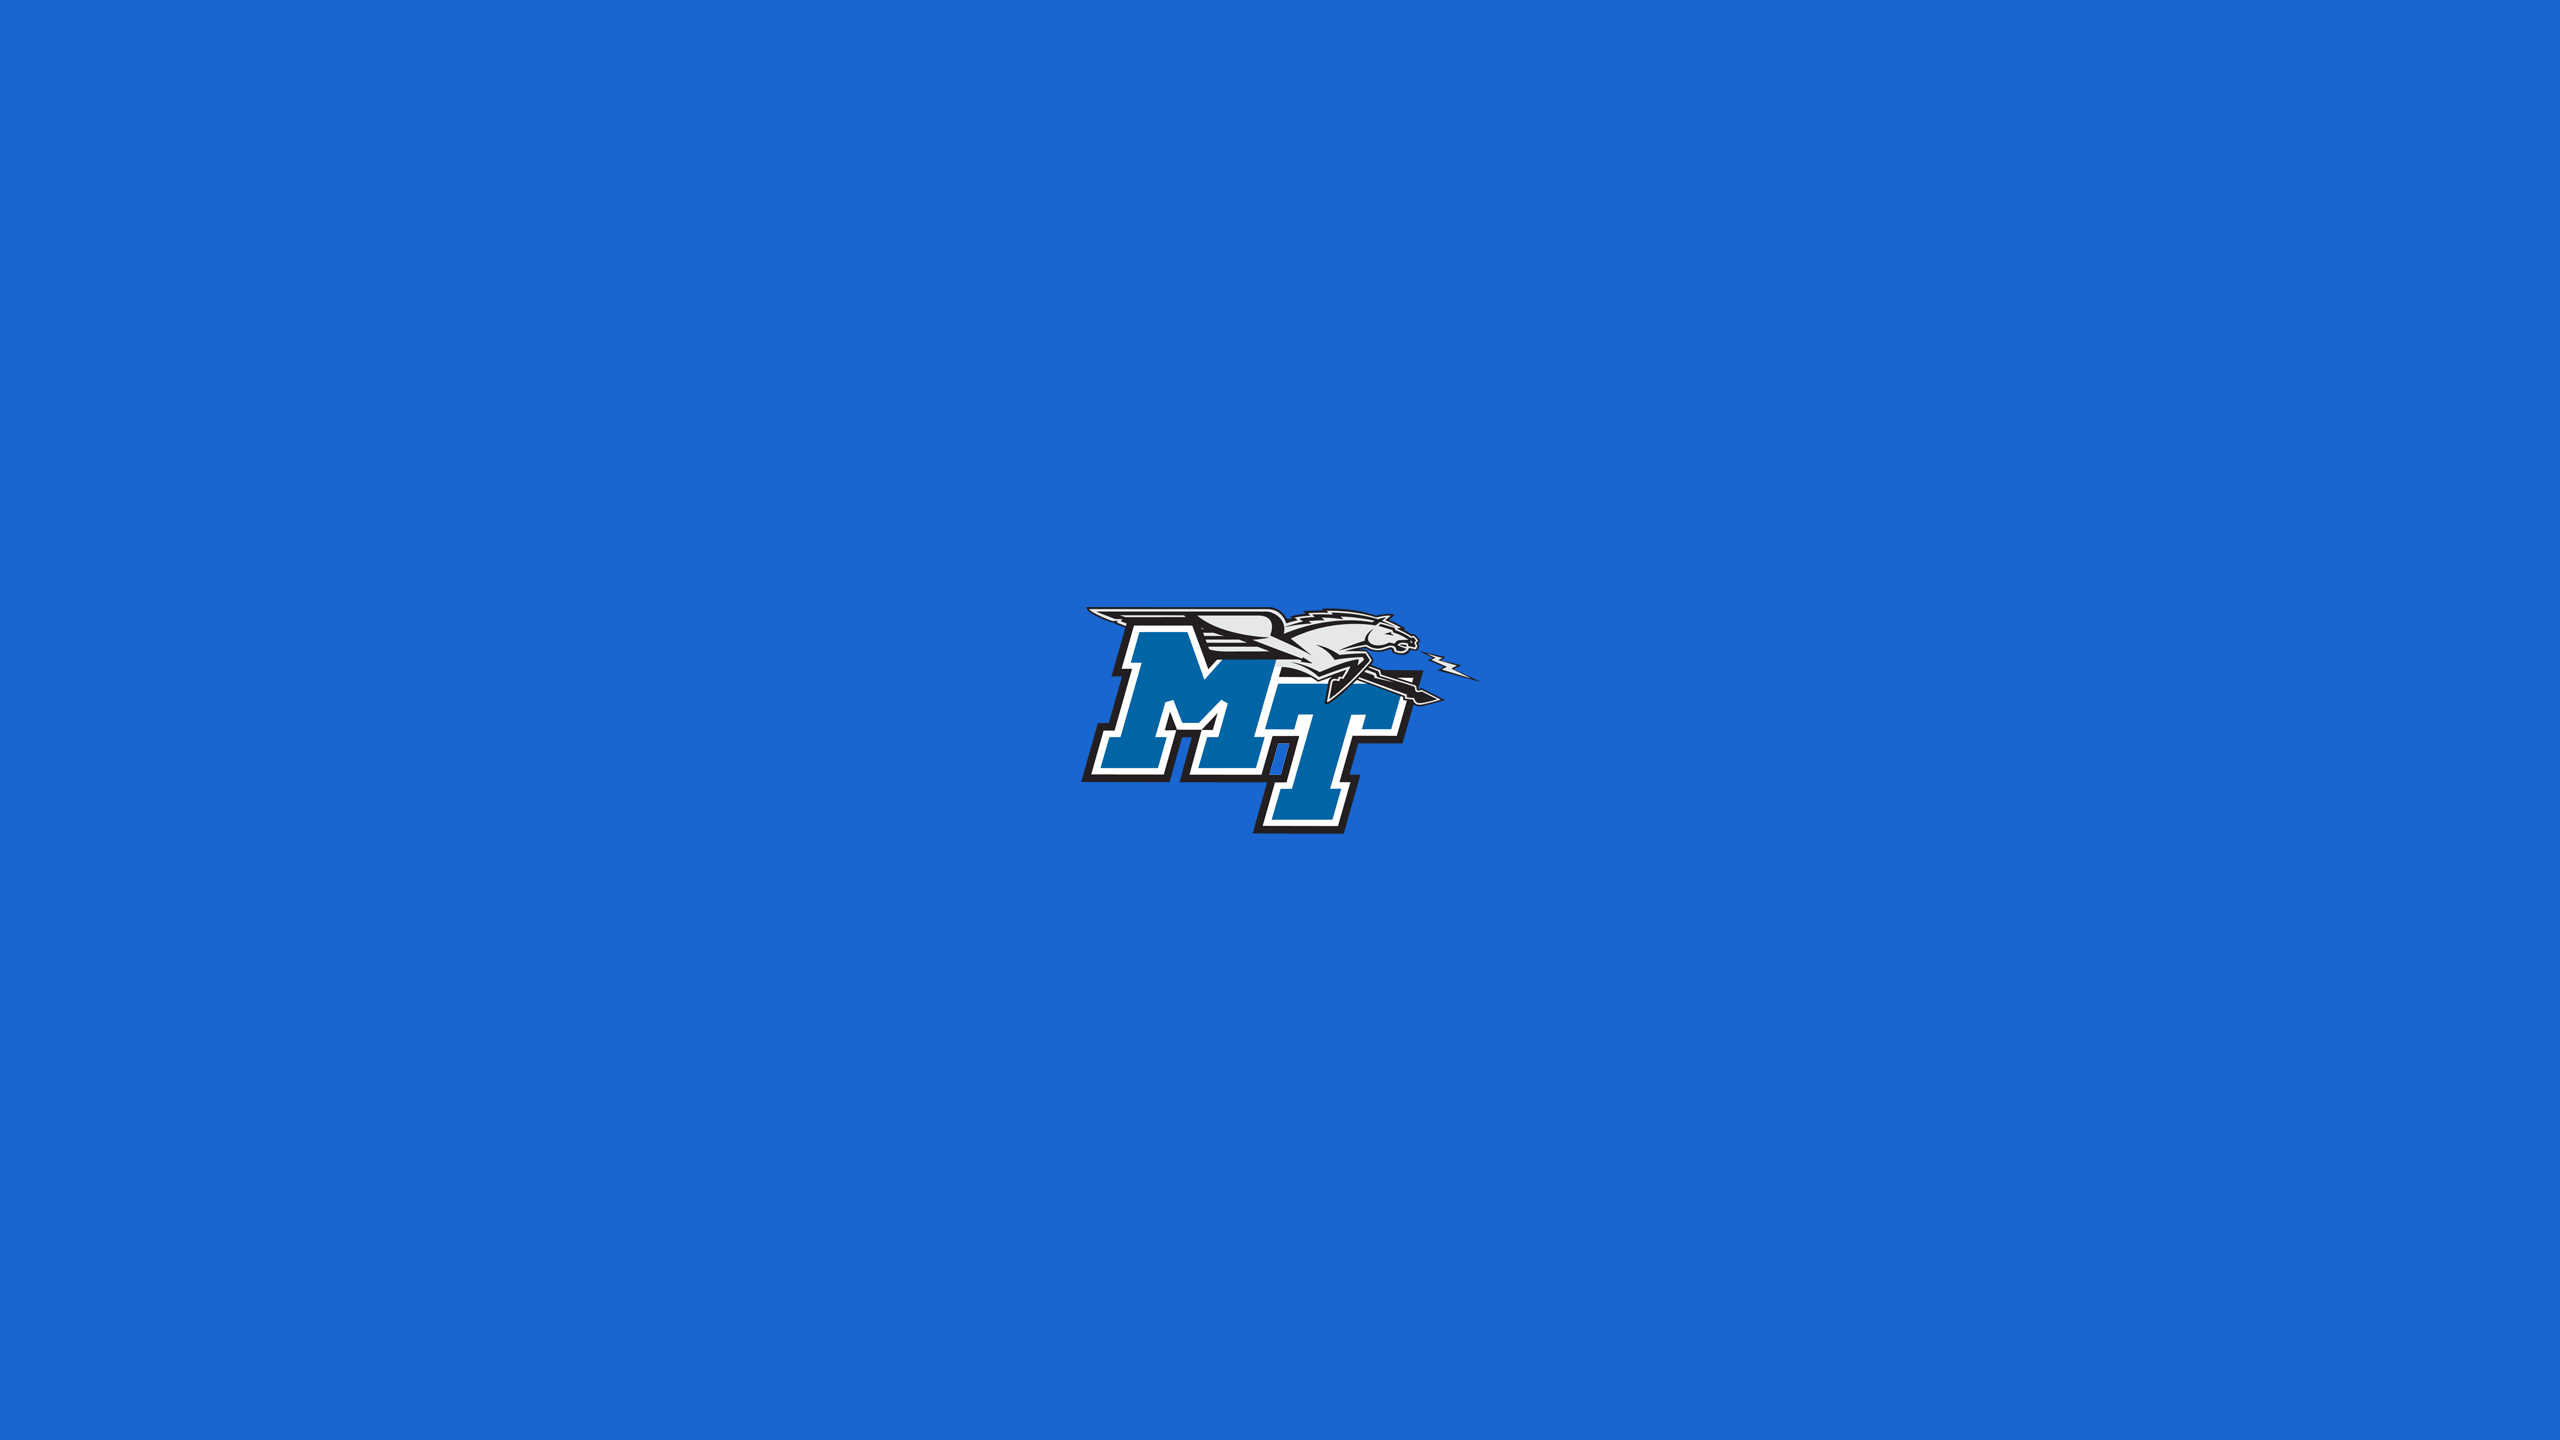 Middle Tennessee State Blue Raiders Football - NCAAF - Square Bettor